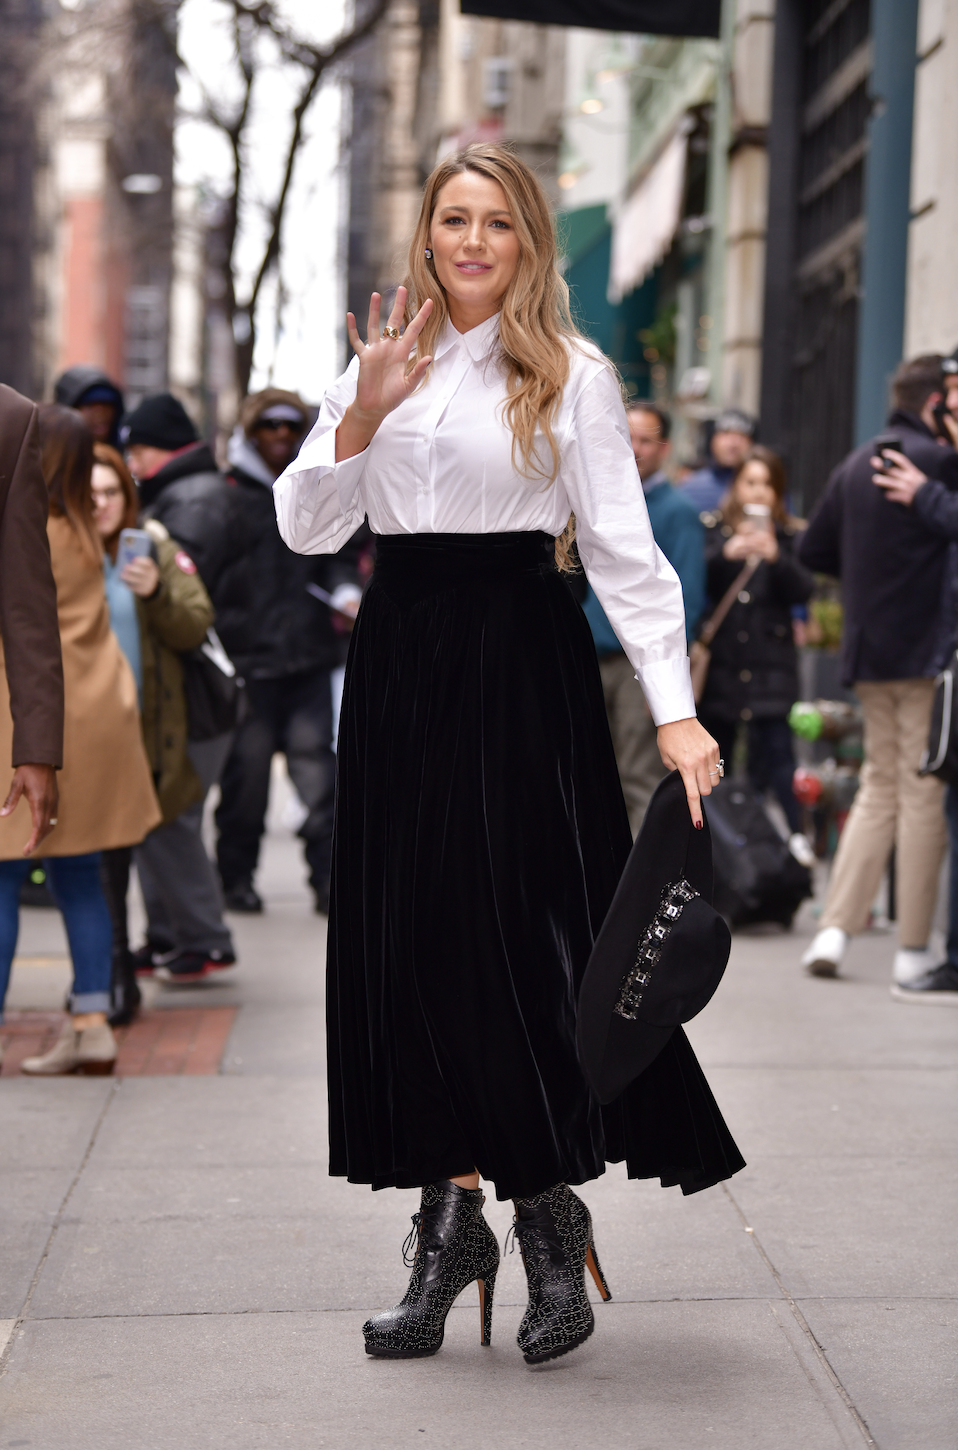 Blake Lively seen on the streets of Manhattan on January 28, 2020, in New York City